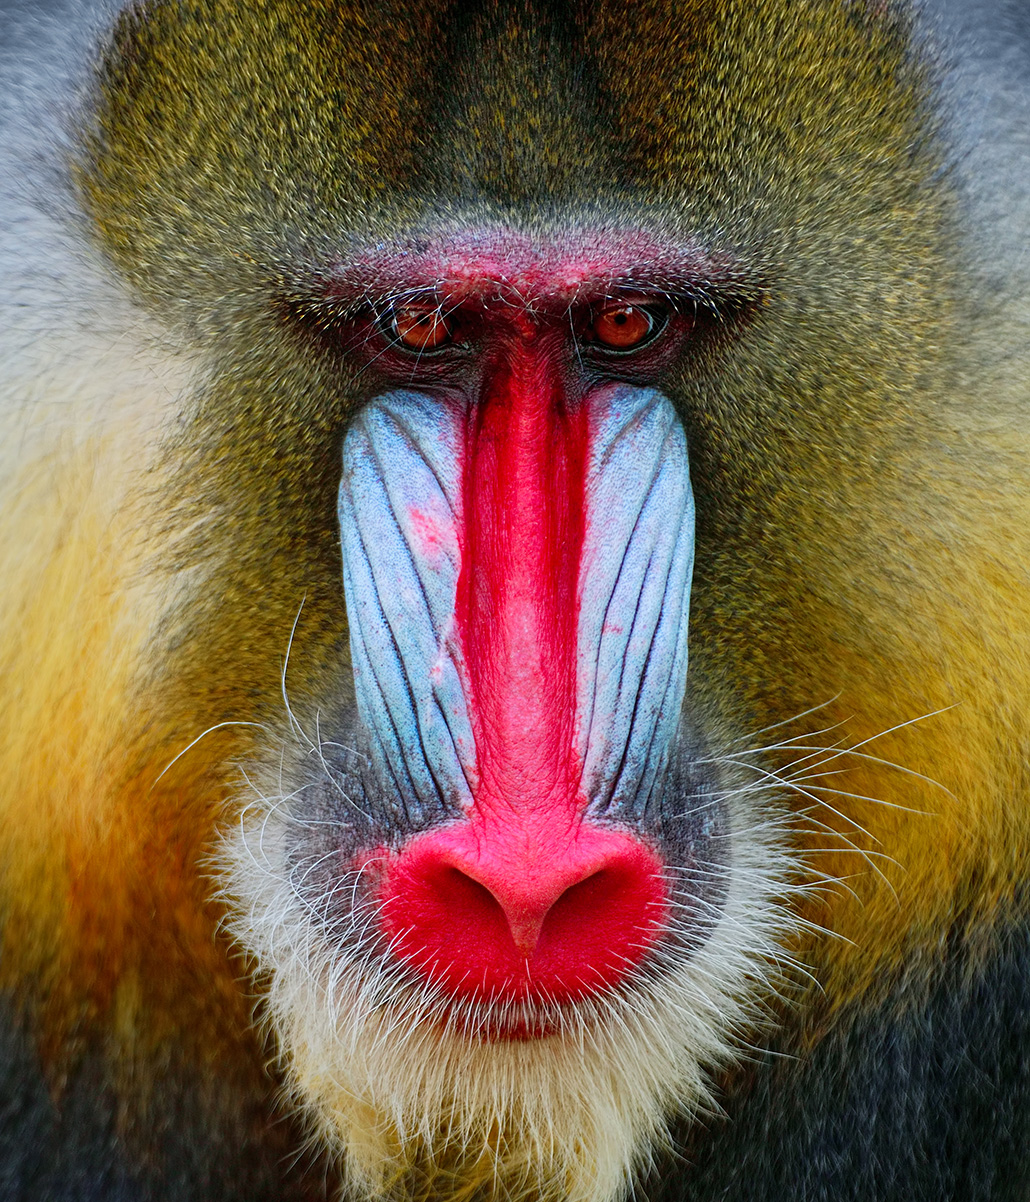 a photo showing the face of a mandrill, it has a long red nose, on either side is a light blue color